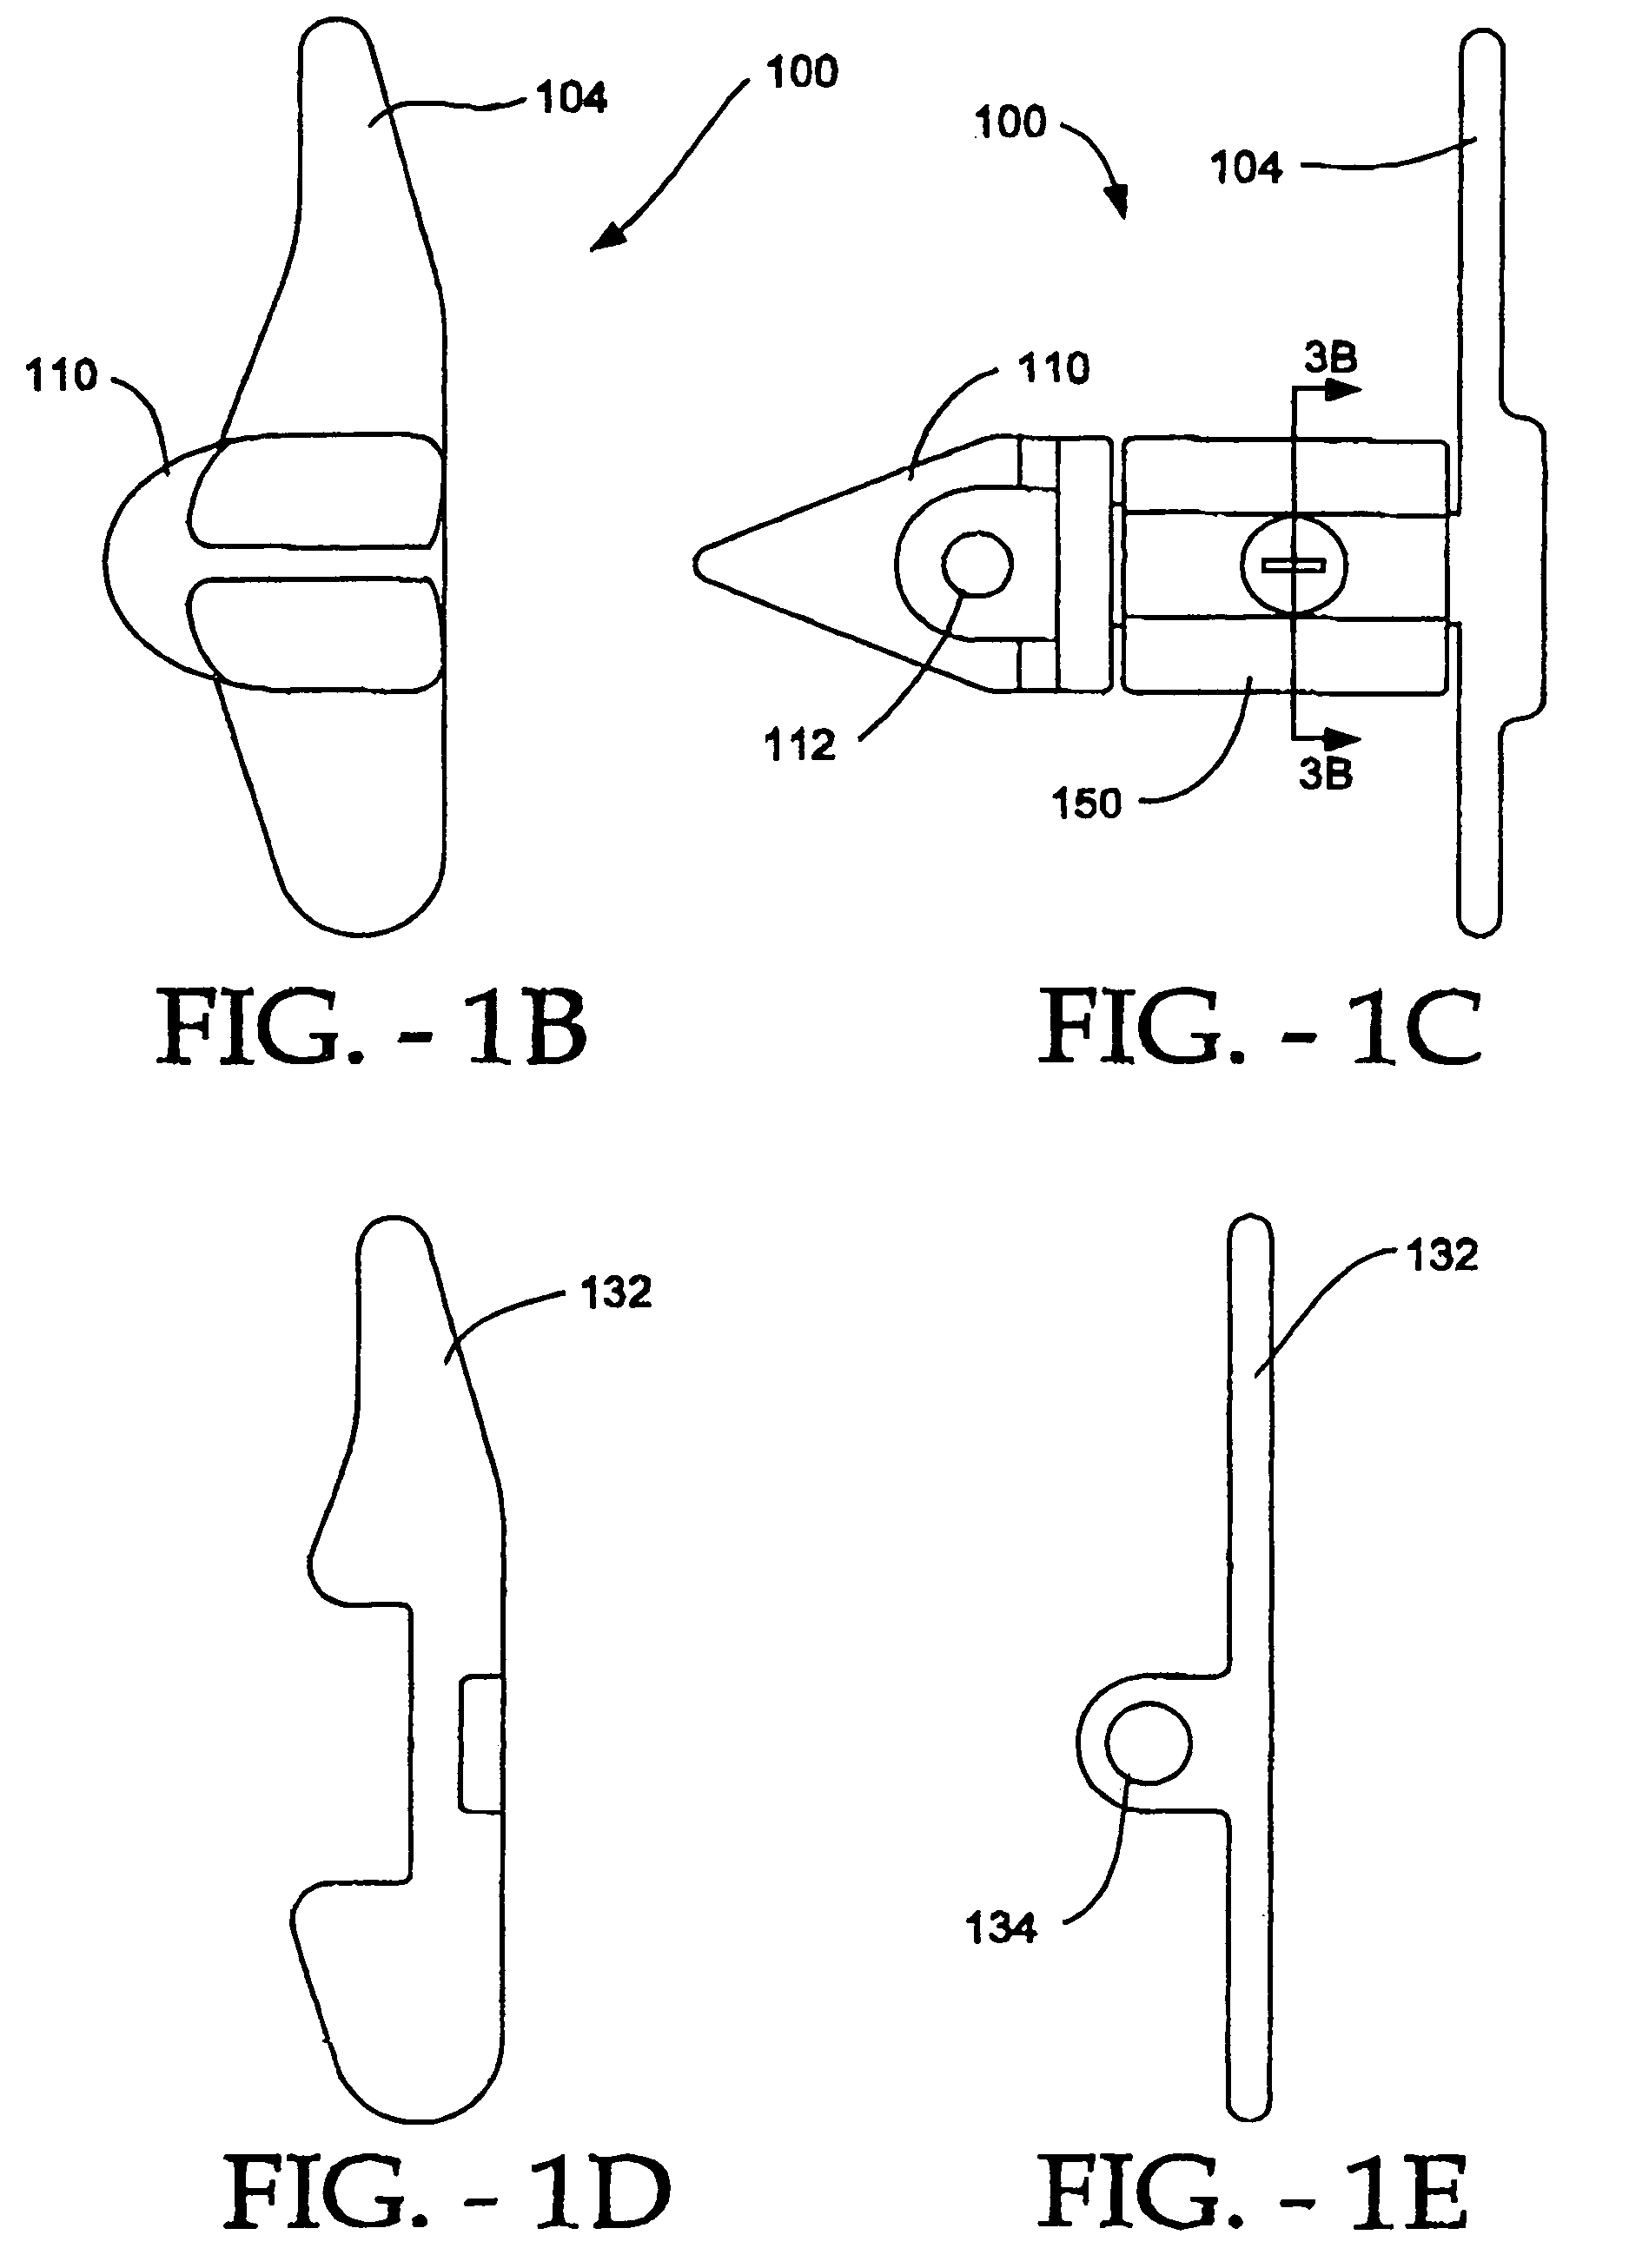 Interspinous process apparatus and method with a selectably expandable spacer